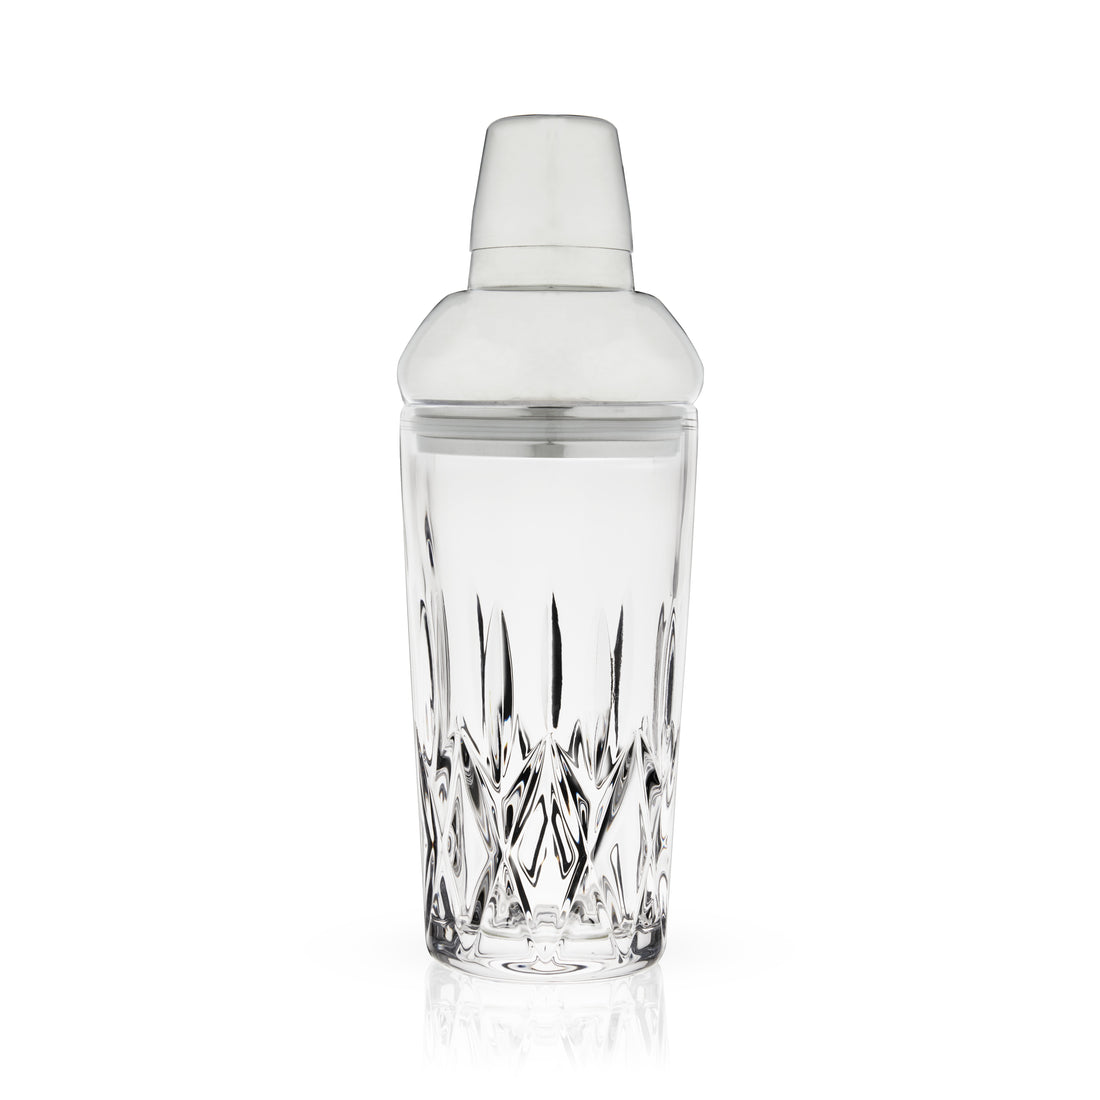 ADMIRAL CRYSTAL COCKTAIL SHAKER